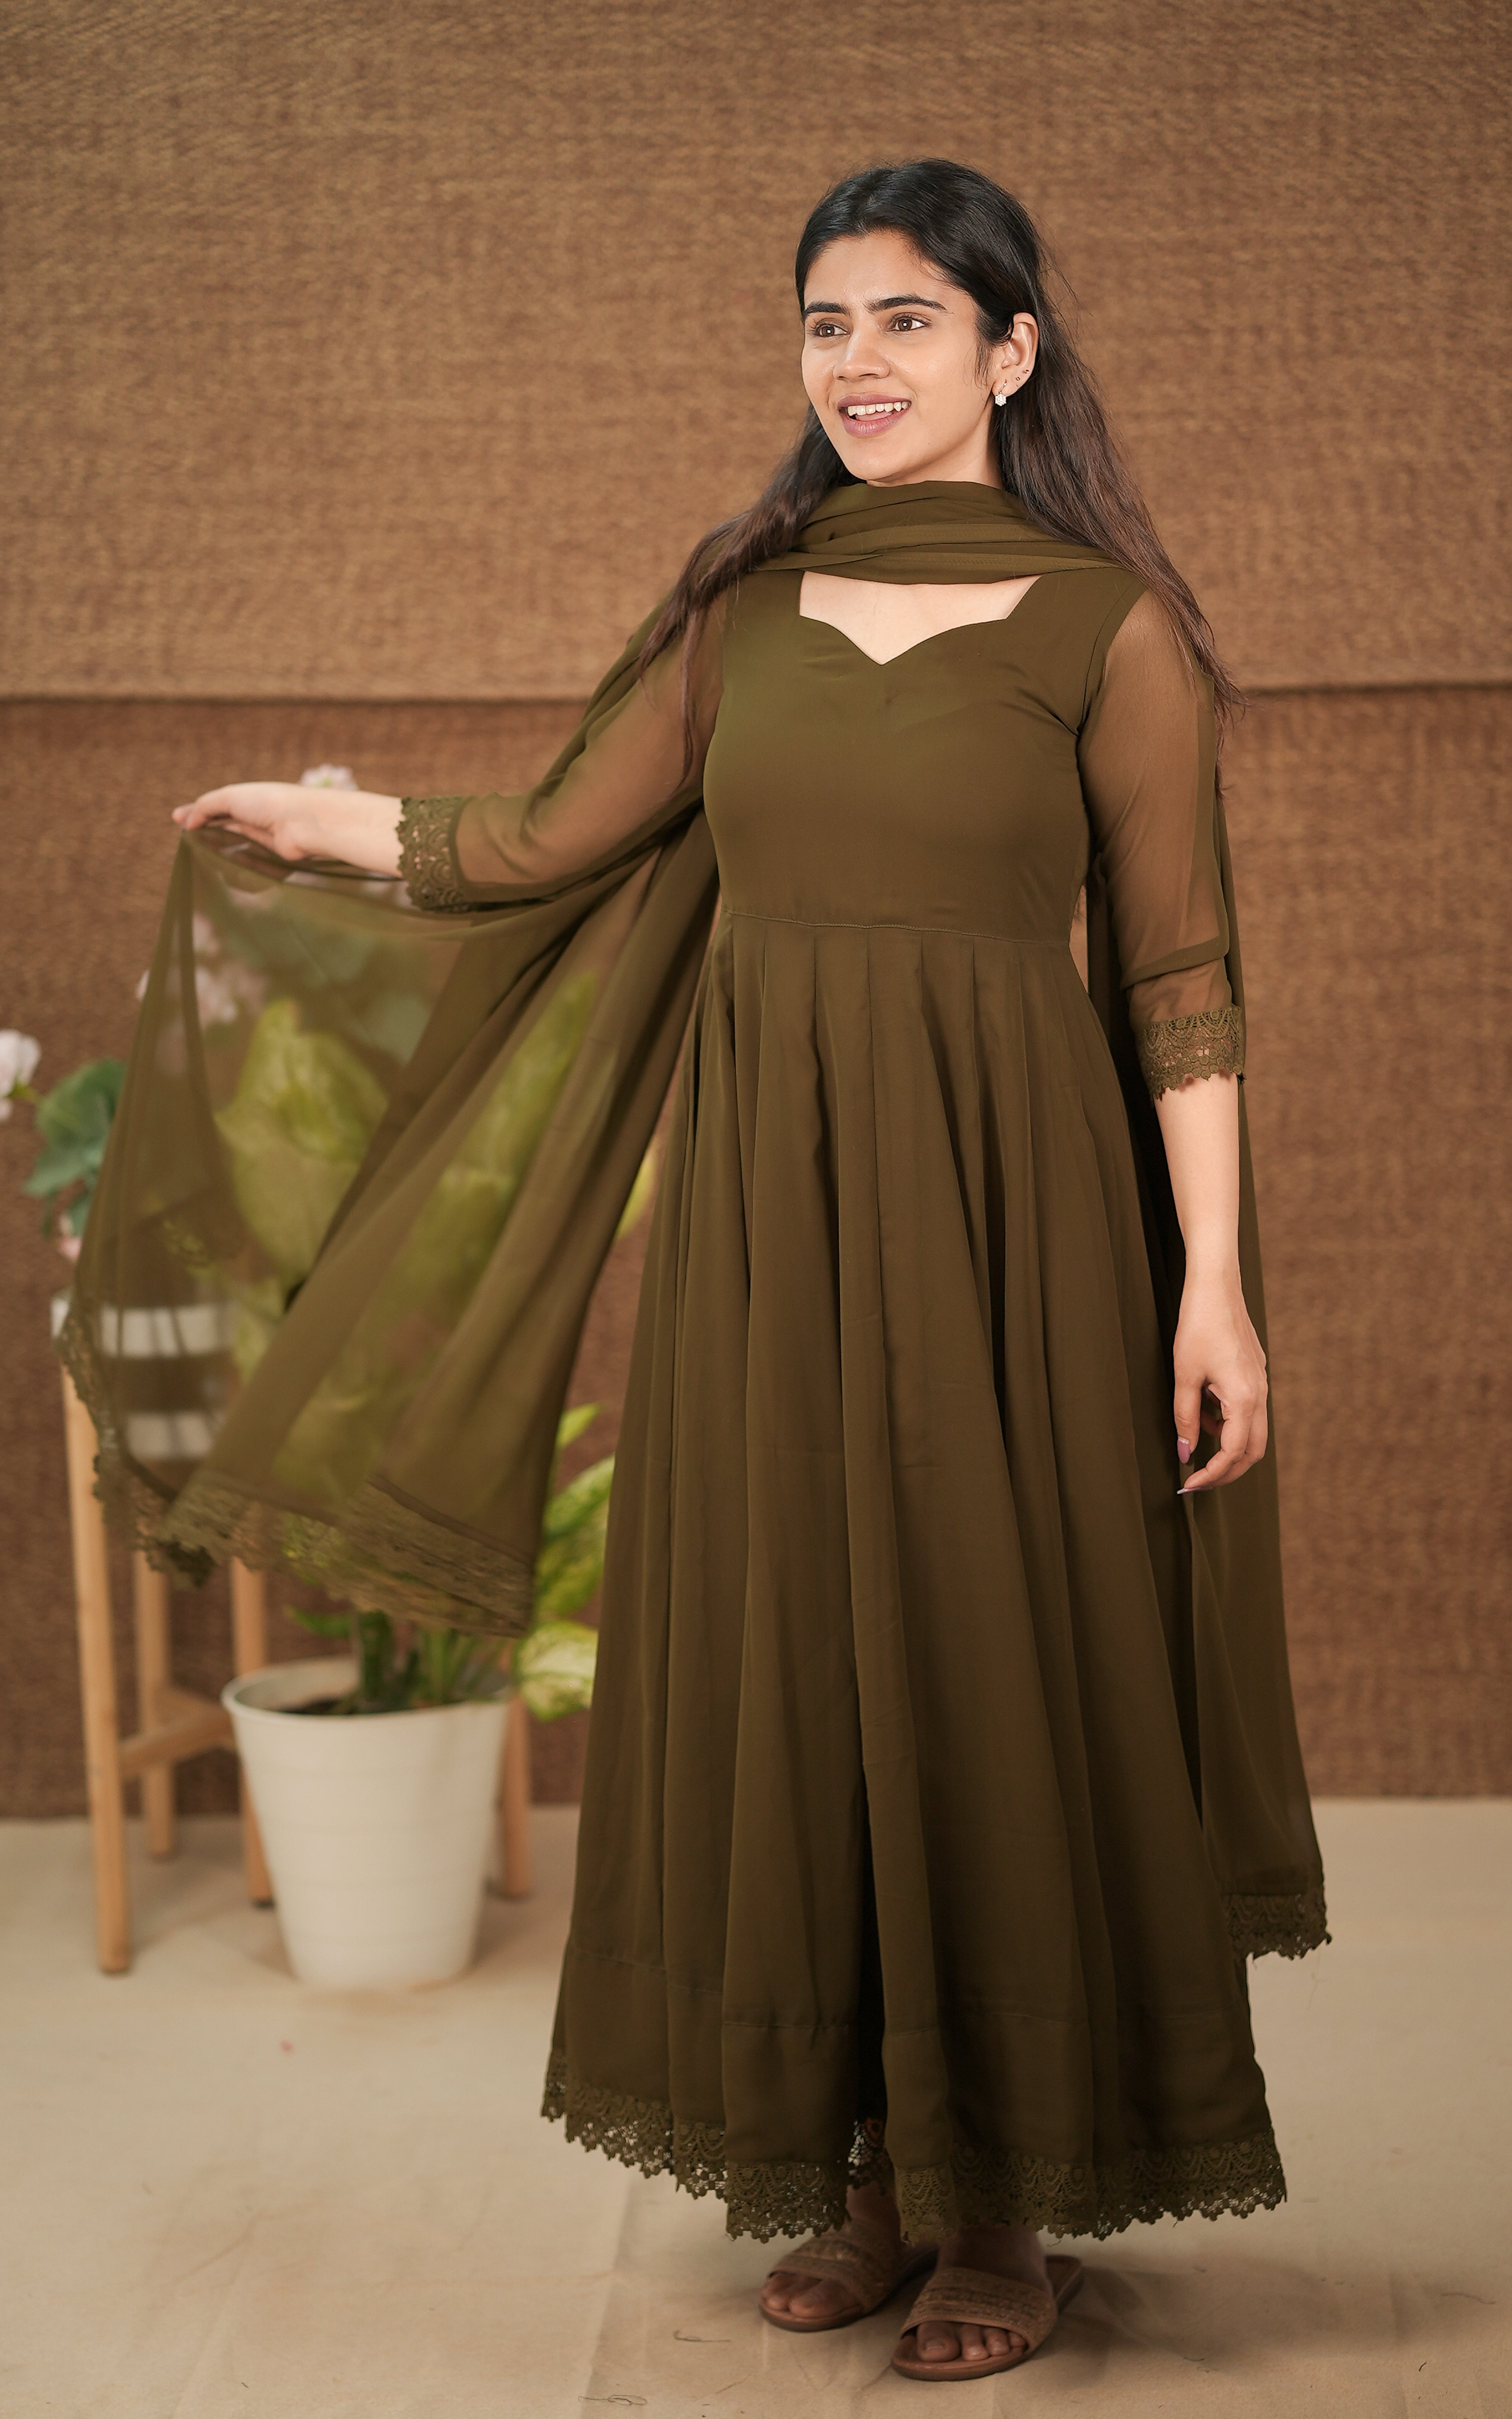 instore kurti set georgette with butter crepe lining full flared anarkali with crochet lace border color: dark olive green 